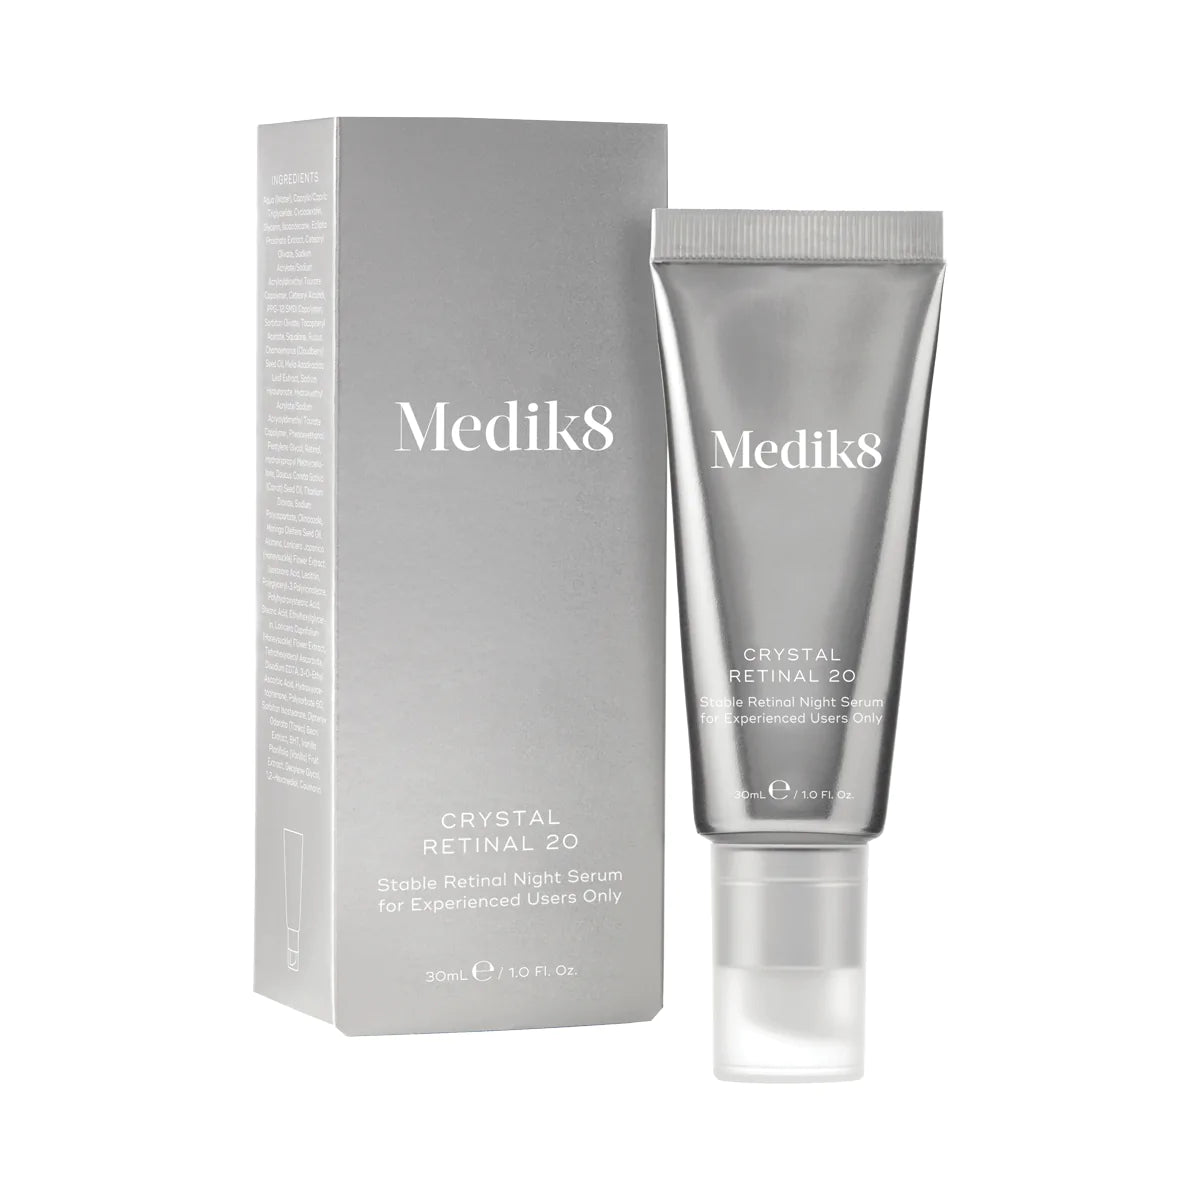 MEDIK8 Crystal Retinal 20: Experience advanced skincare with MEDIK8 Crystal Retinal 20, a high-strength retinal serum known for its potent anti-aging properties, promoting smoother, brighter, and more youthful-looking skin.